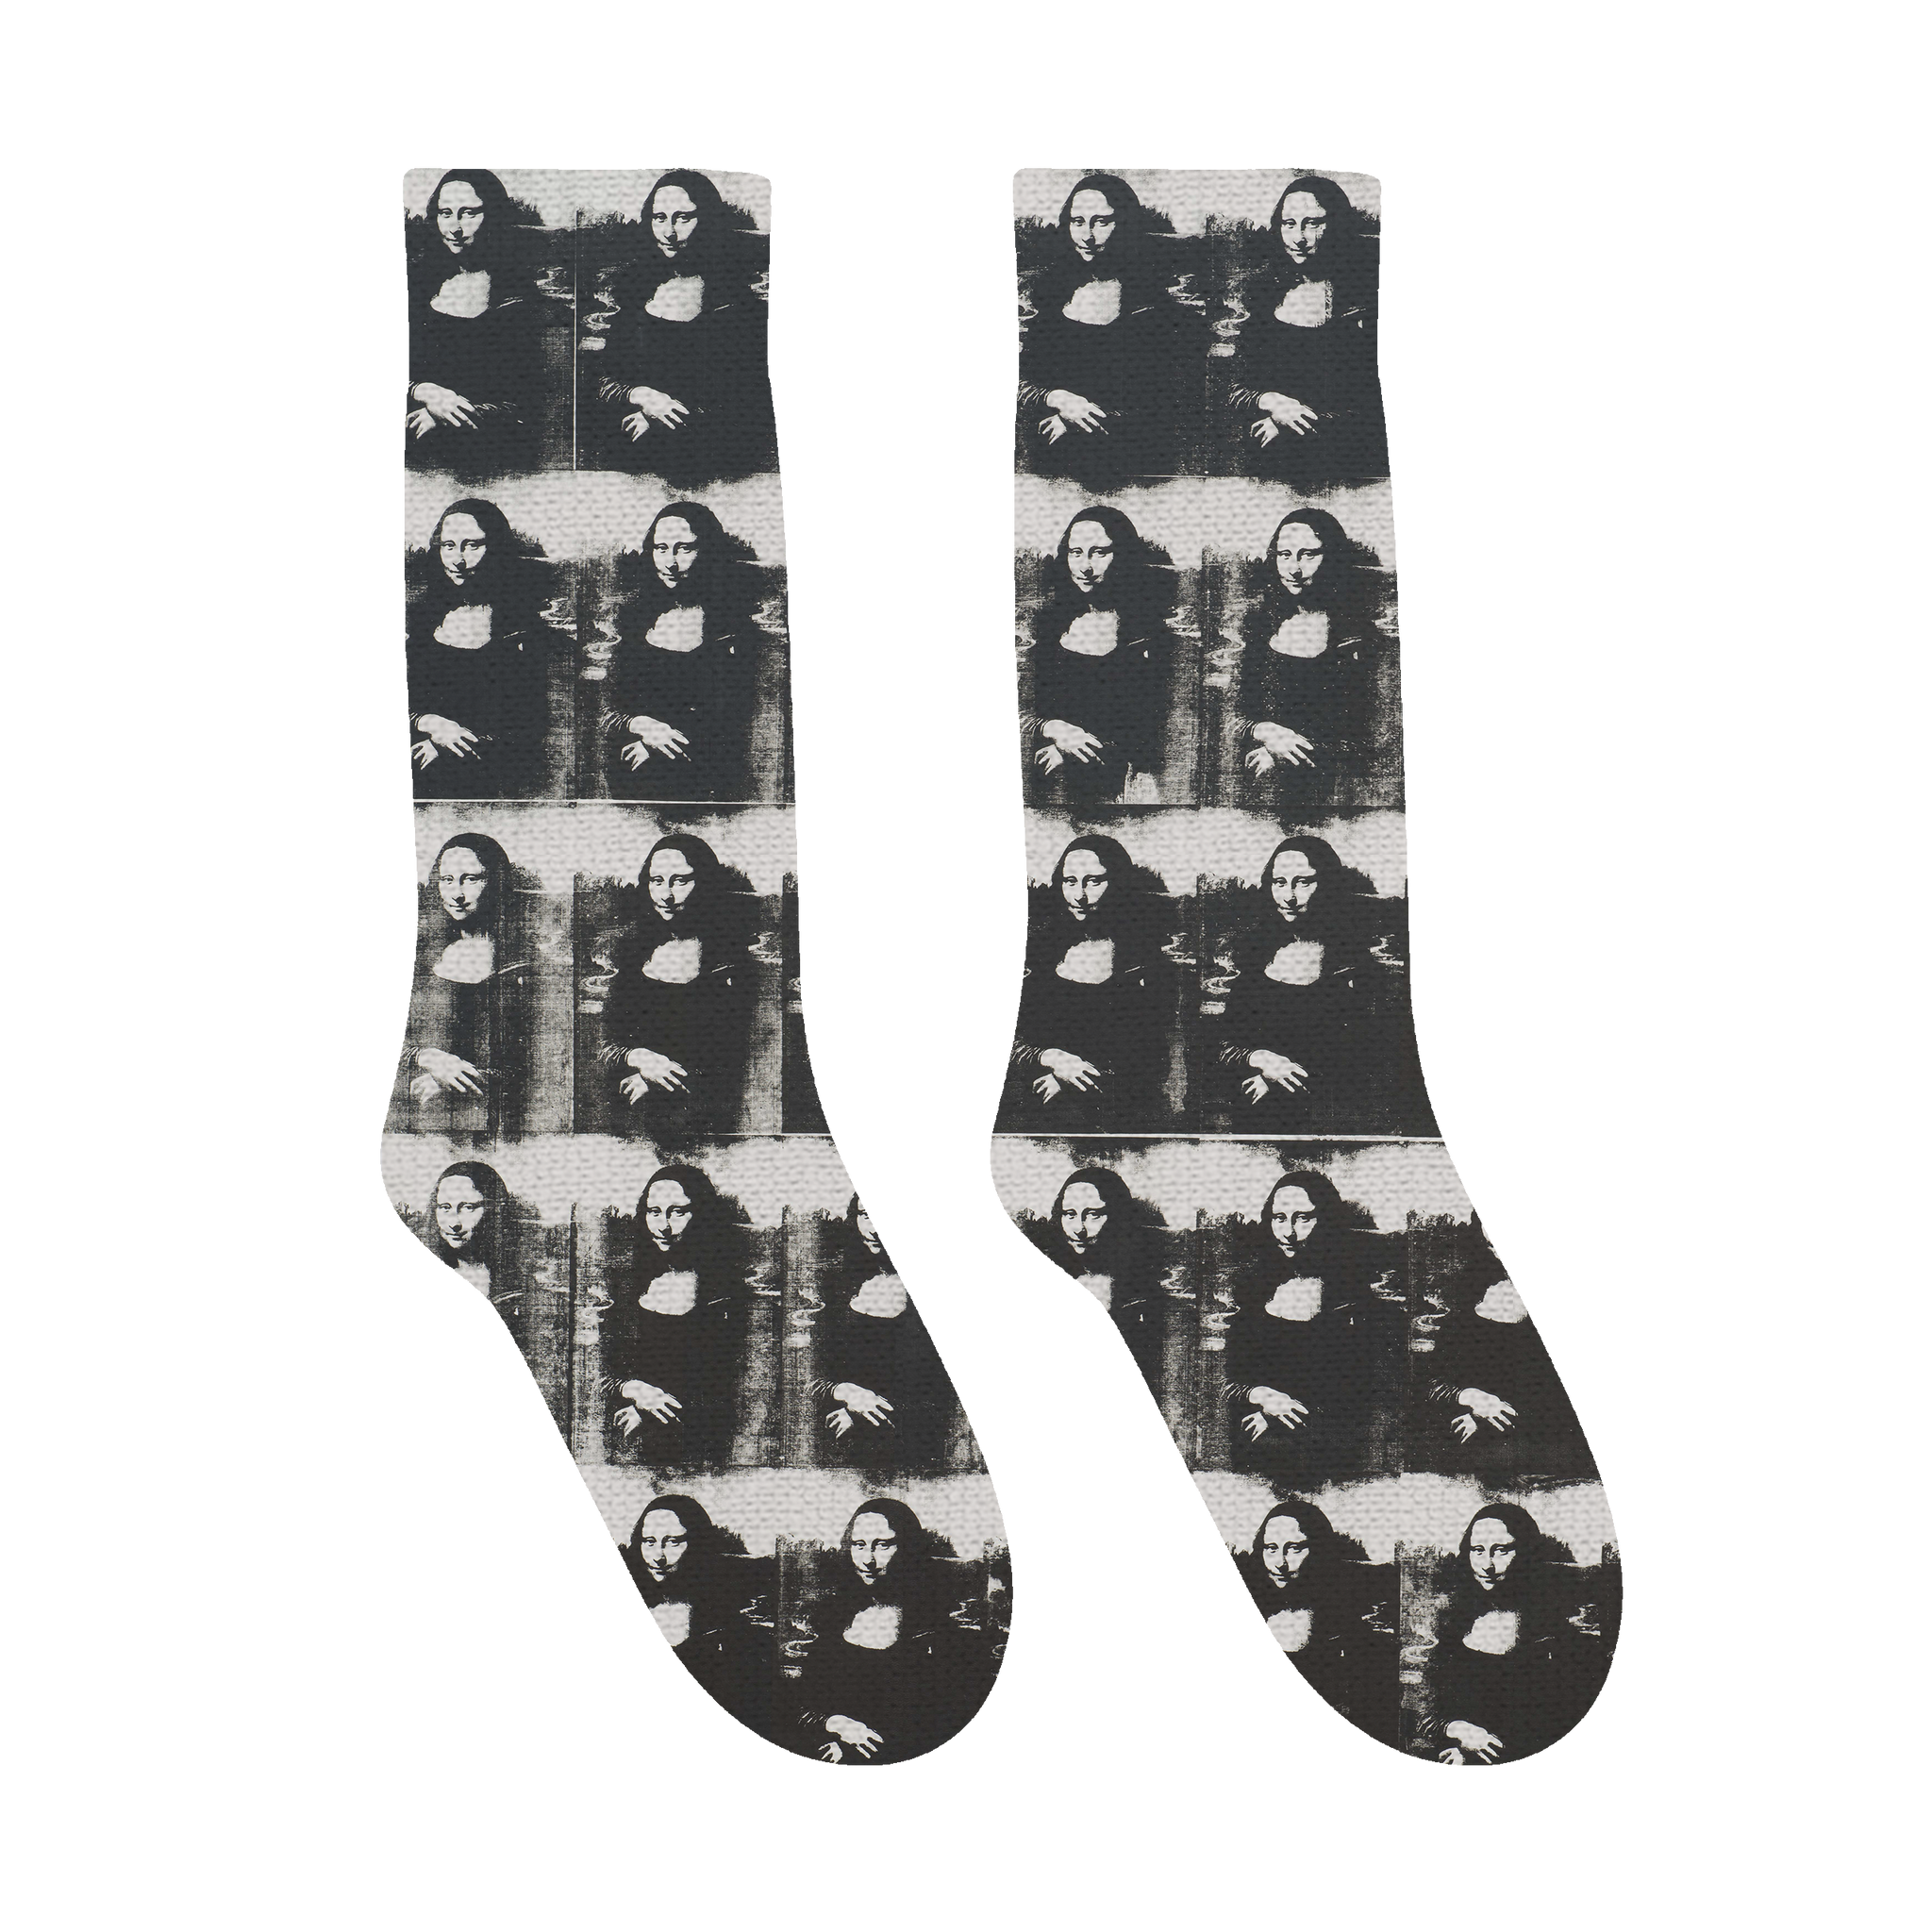 Andy Warhol "Thirty Are Better Than One" Socks